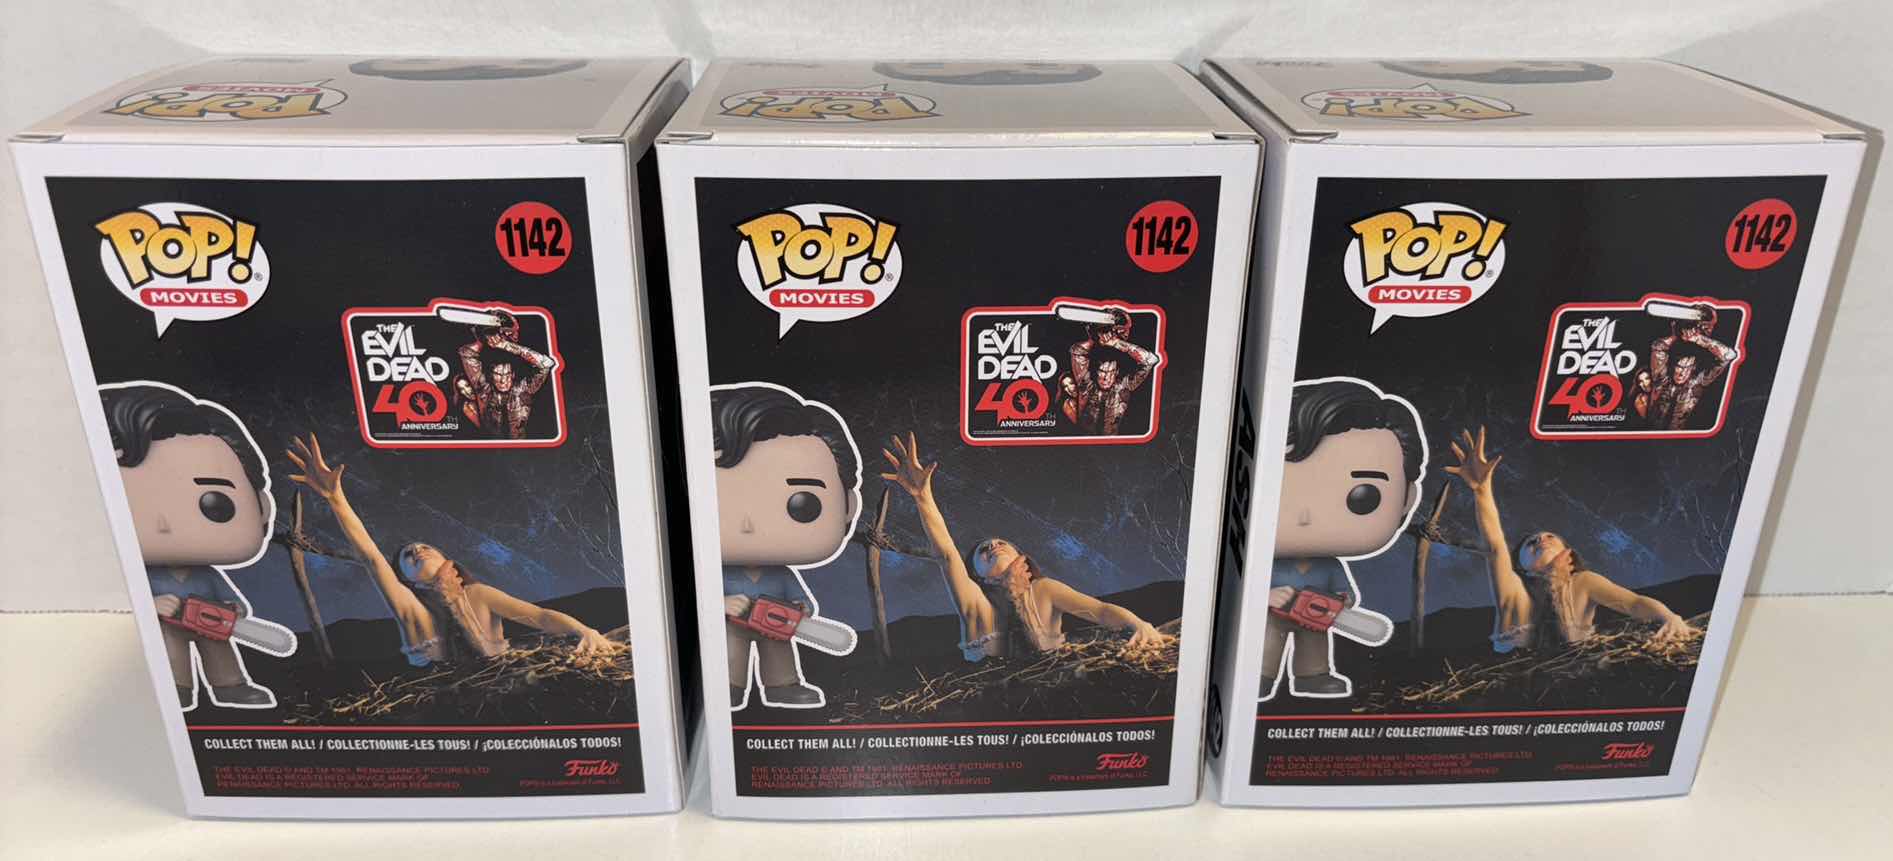 Photo 3 of NEW FUNKO POP! MOVIES 3-PACK VINYL FIGURES, THE EVIL DEAD 40TH ANNIVERSARY #1142 “ASH”